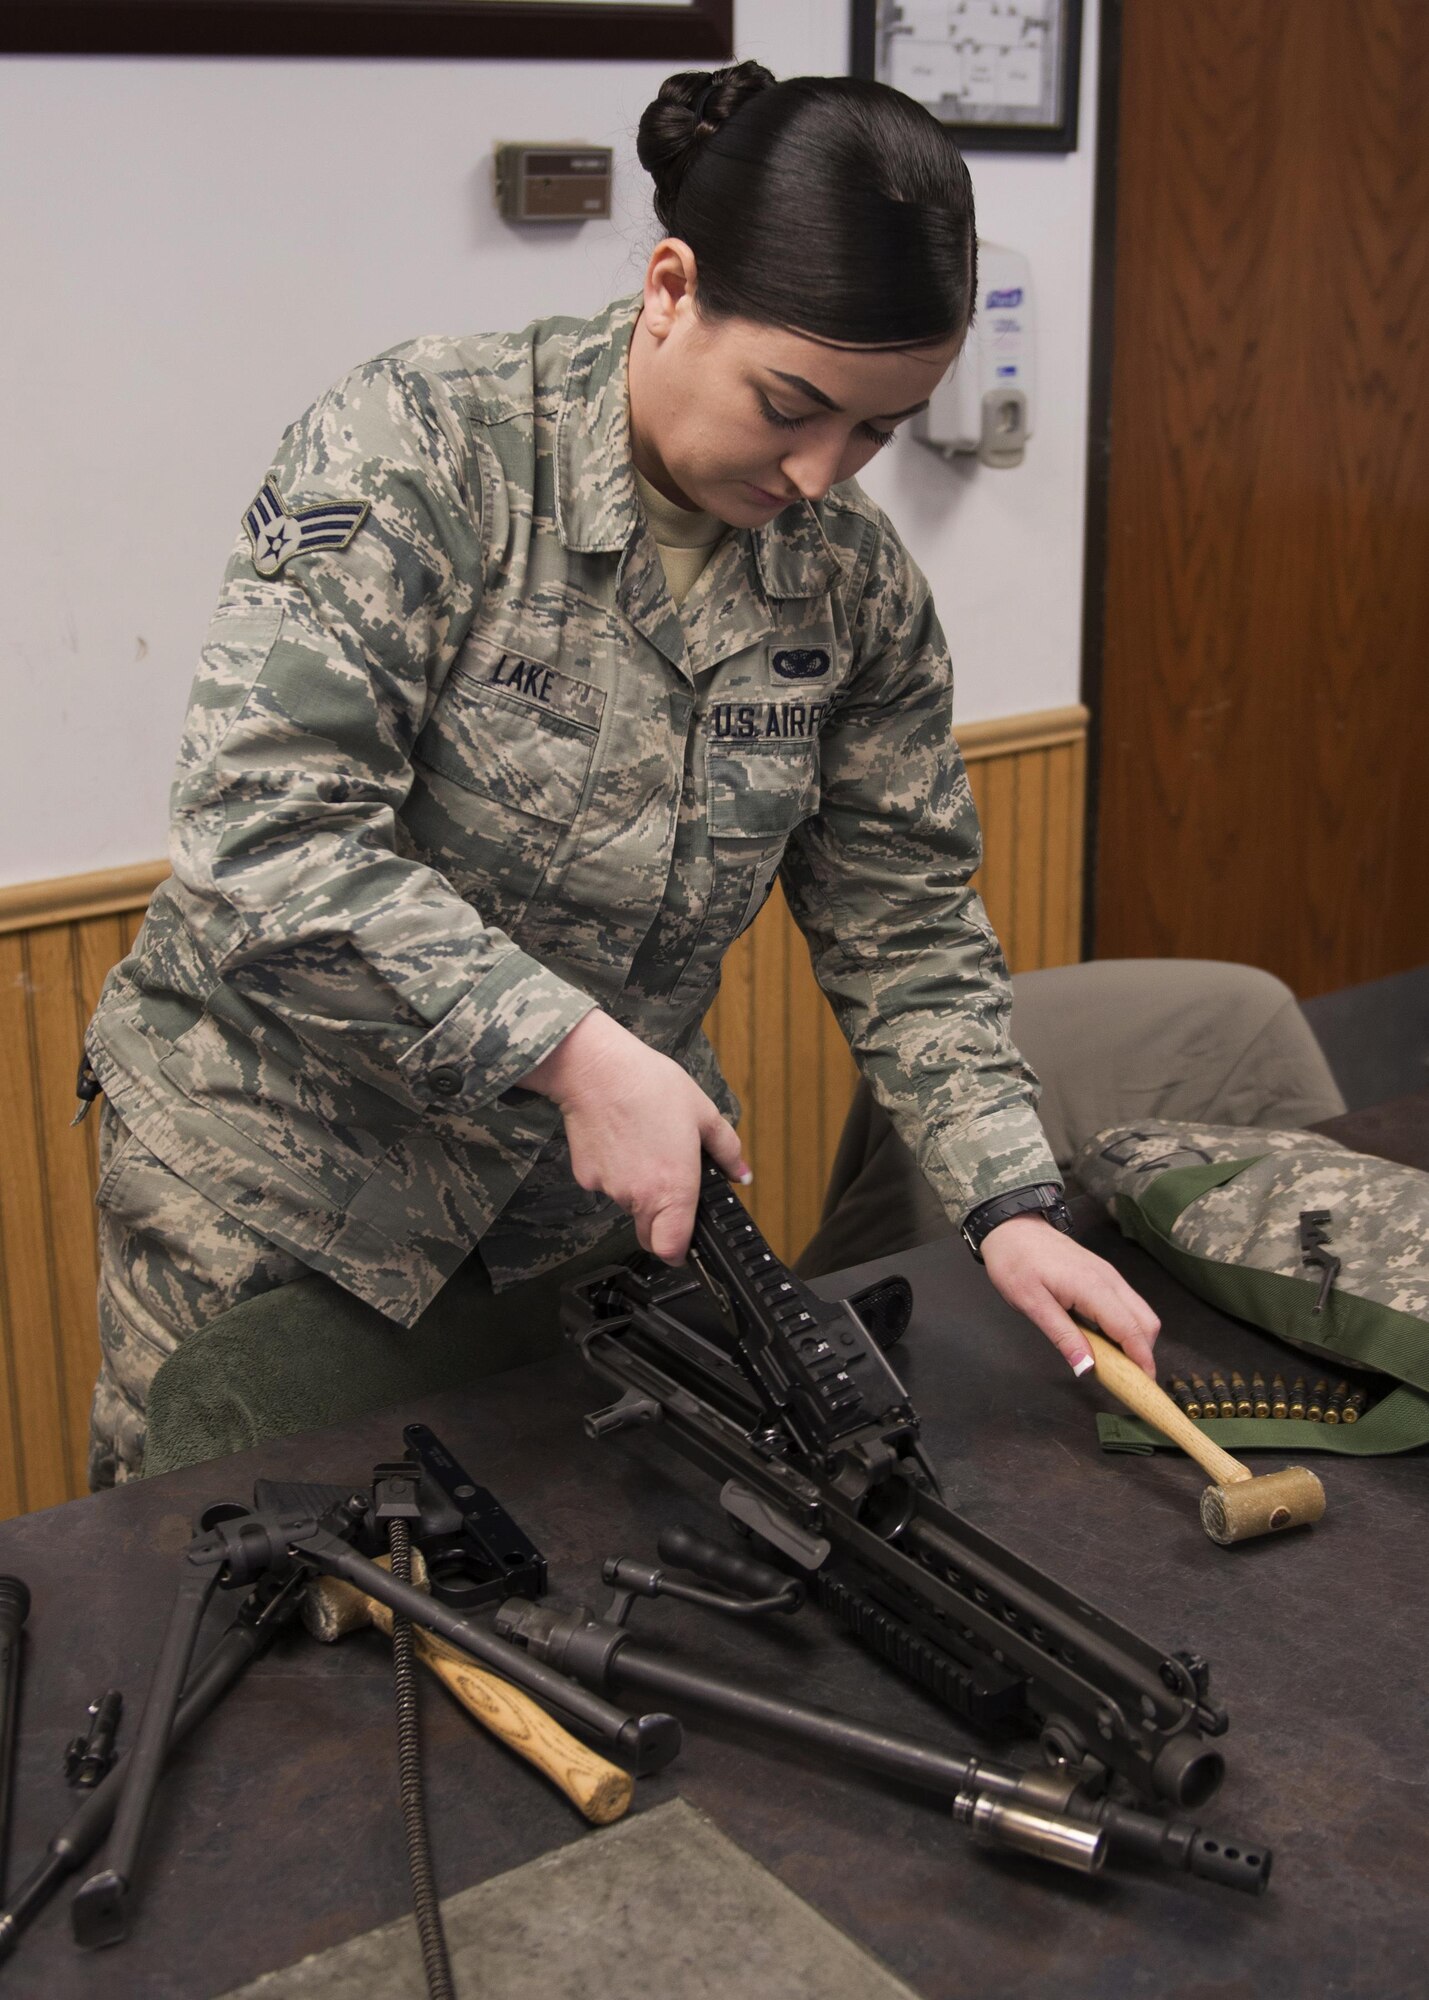 Senior Airman Bailey Lake, 5th Security Forces Squadron combat arms training and maintenance student, takes apart an M249 light machine gun at the CATM site on Minot Air Force Base, N.D., Feb. 1, 2017. To qualify on a firearm at CATM, every student must be able to break down and rebuild the firearm. (U.S. Air Force photo/Airman 1st Class Alyssa M. Akers)